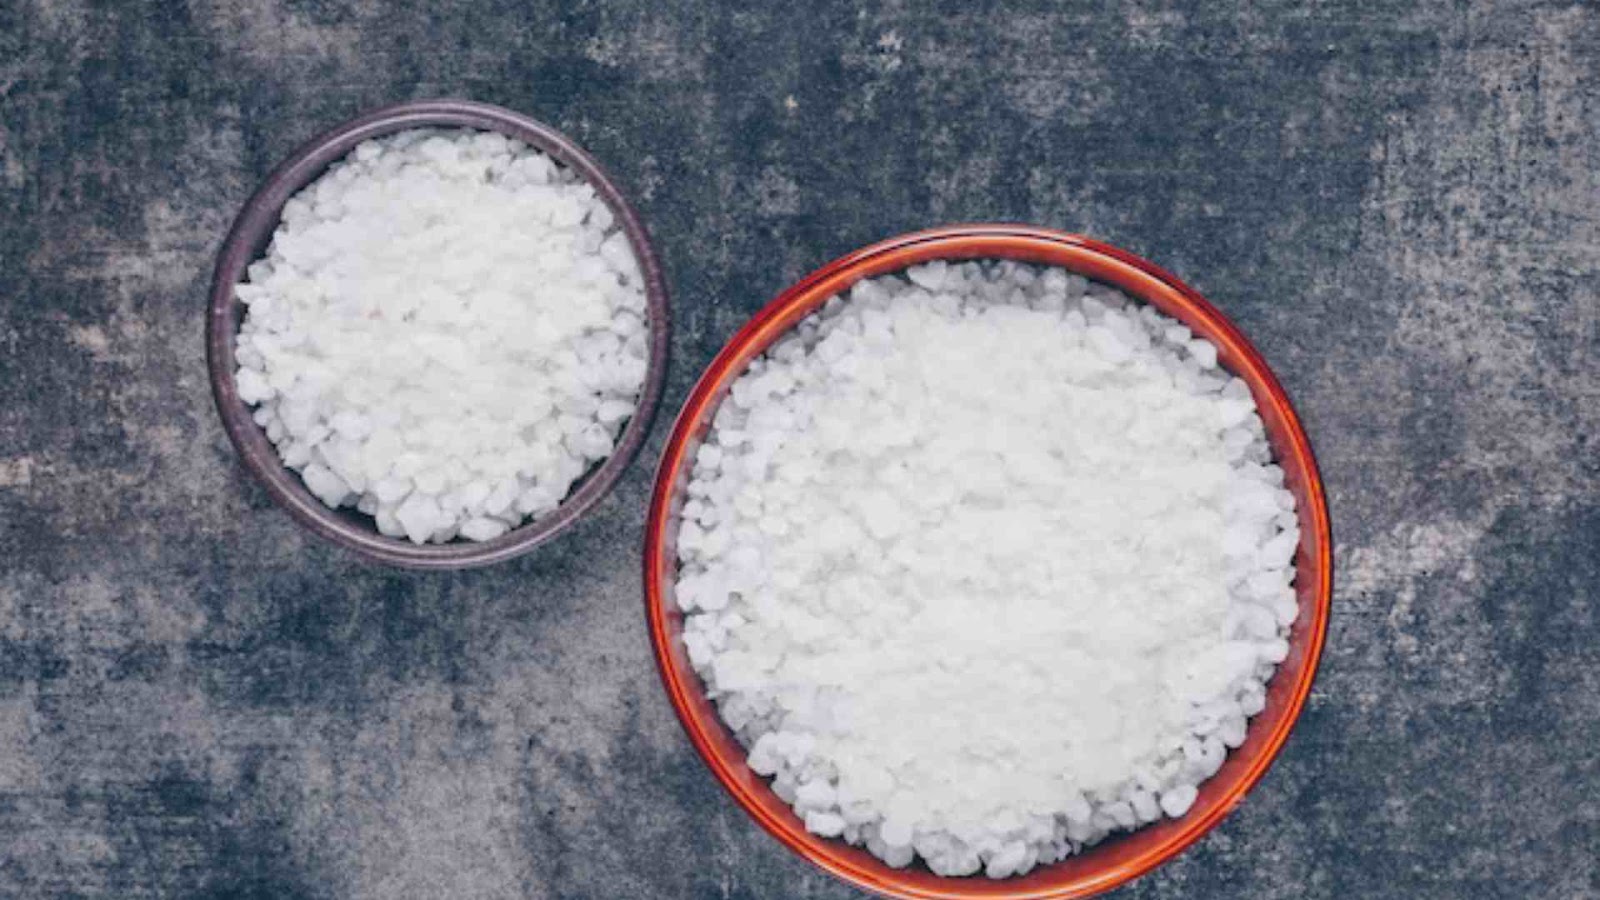 What is caustic soda?